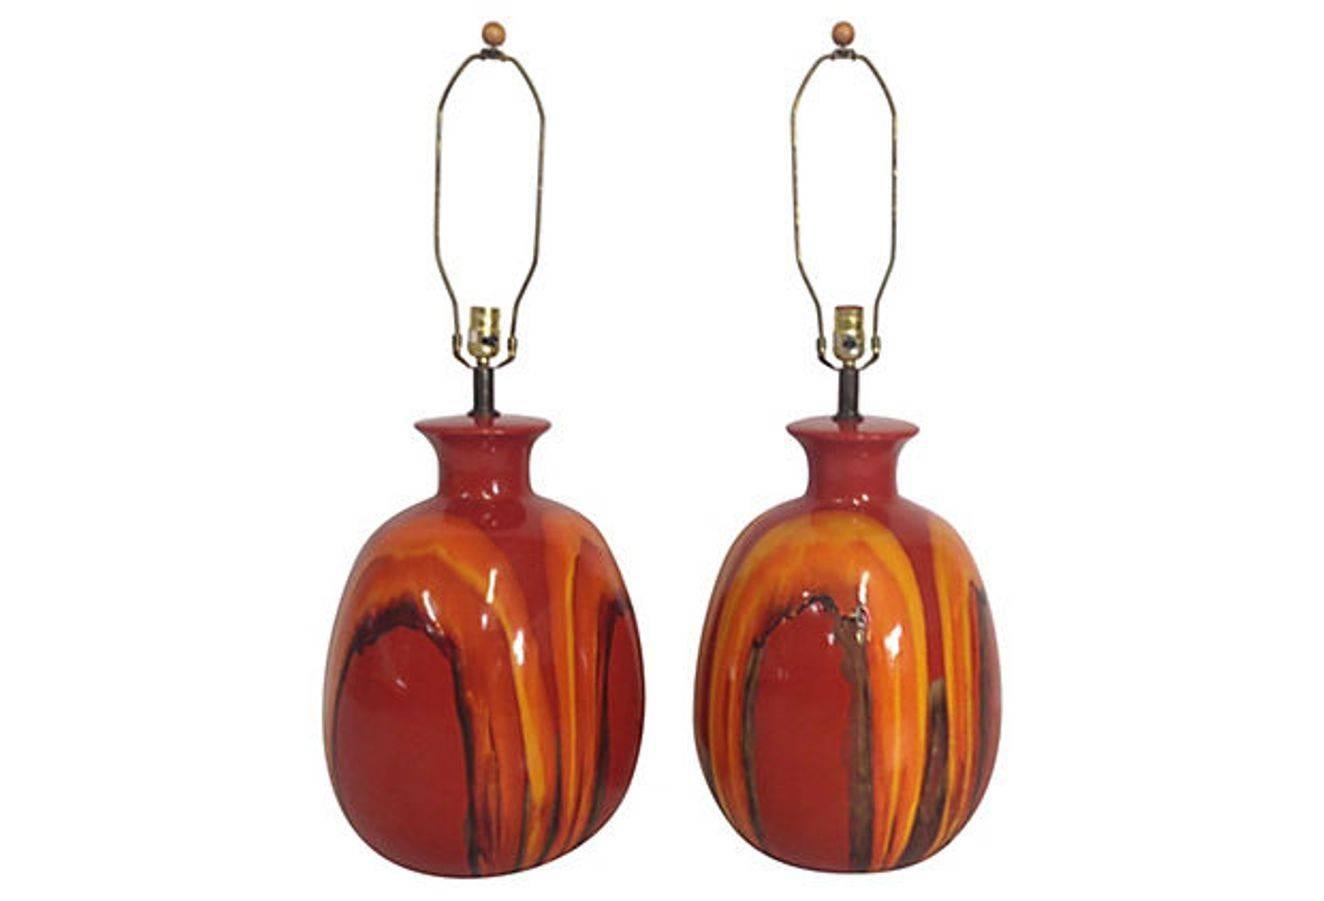 Pair of Mid-Century Modern oversize orange drip-glaze ceramic lamps. Each lamp comes with the original round walnut finial. Wired for U.S. In working order, using standard bulbs. Measures: To socket 24